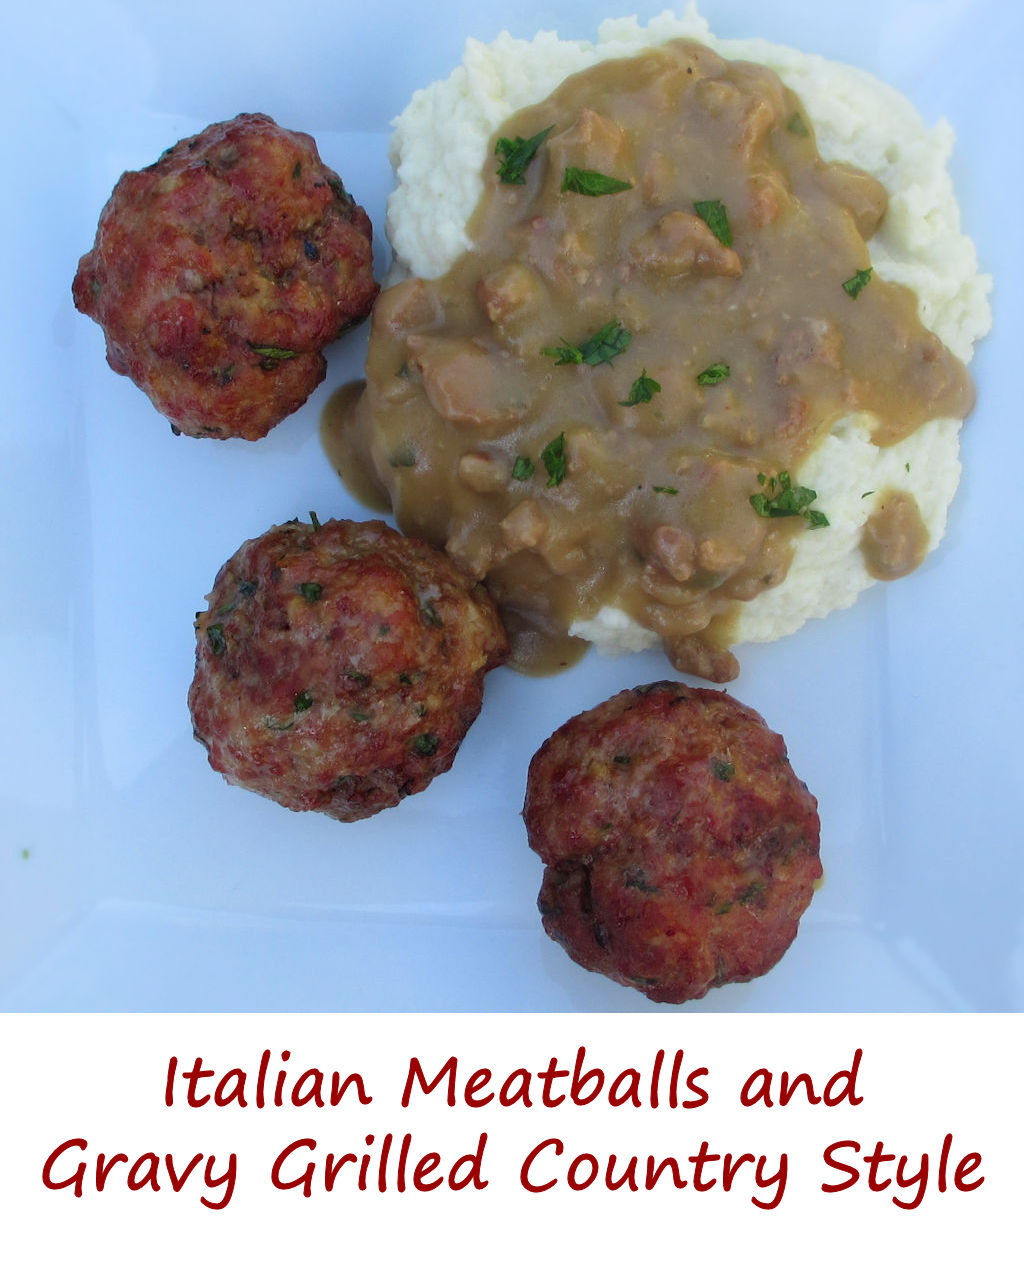 Italian Meatballs and Gravy Grilled Country Style